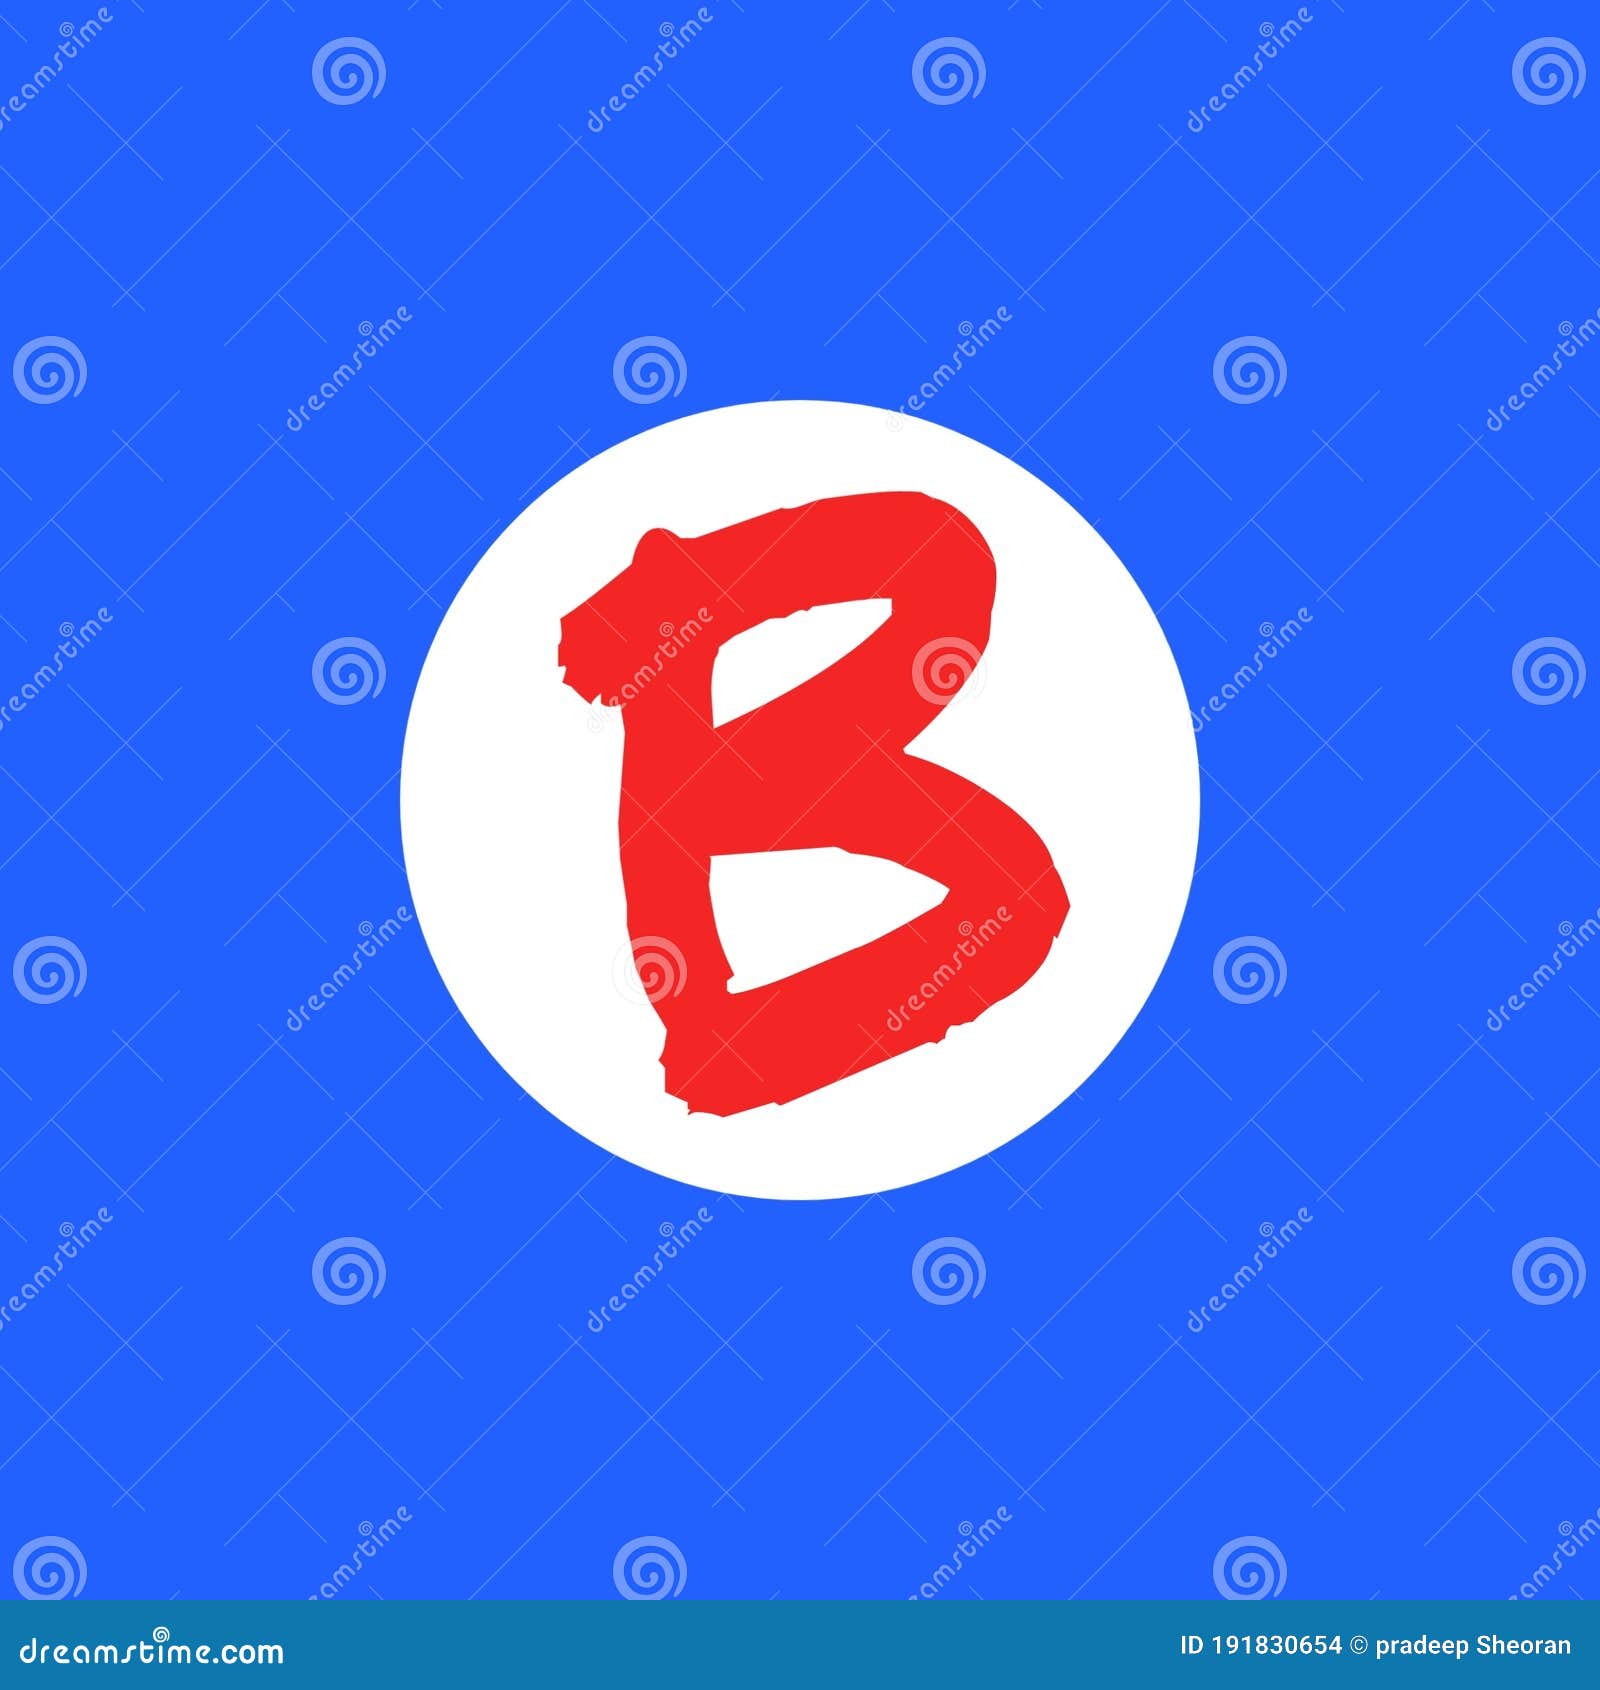 Stylish Texture Image of Red B Alphabet on White Heart with Blue Background  Wallpaper Stock Illustration - Illustration of text, diagram: 191830654